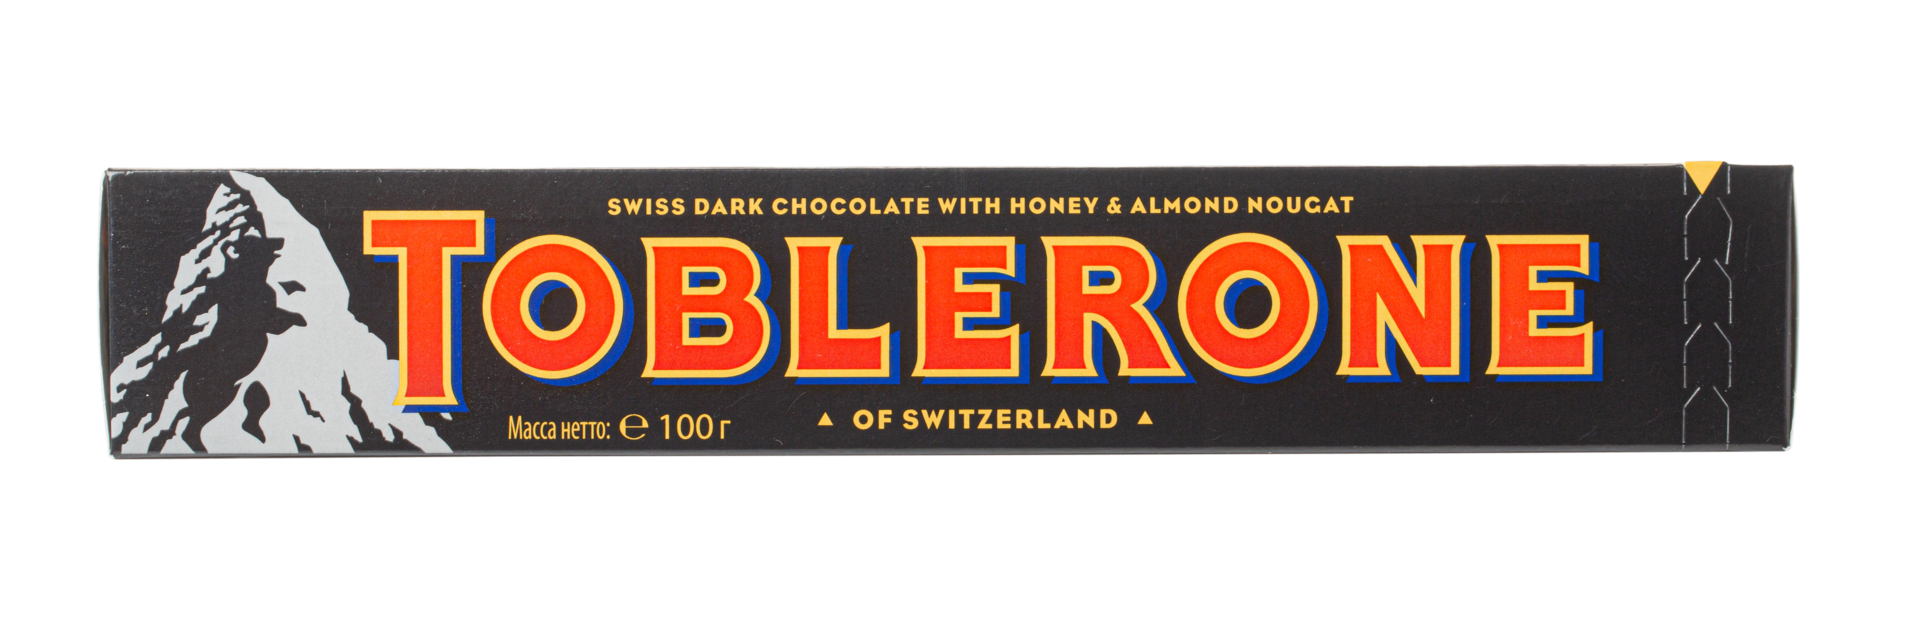 traditionell mörk toblerone choklad png